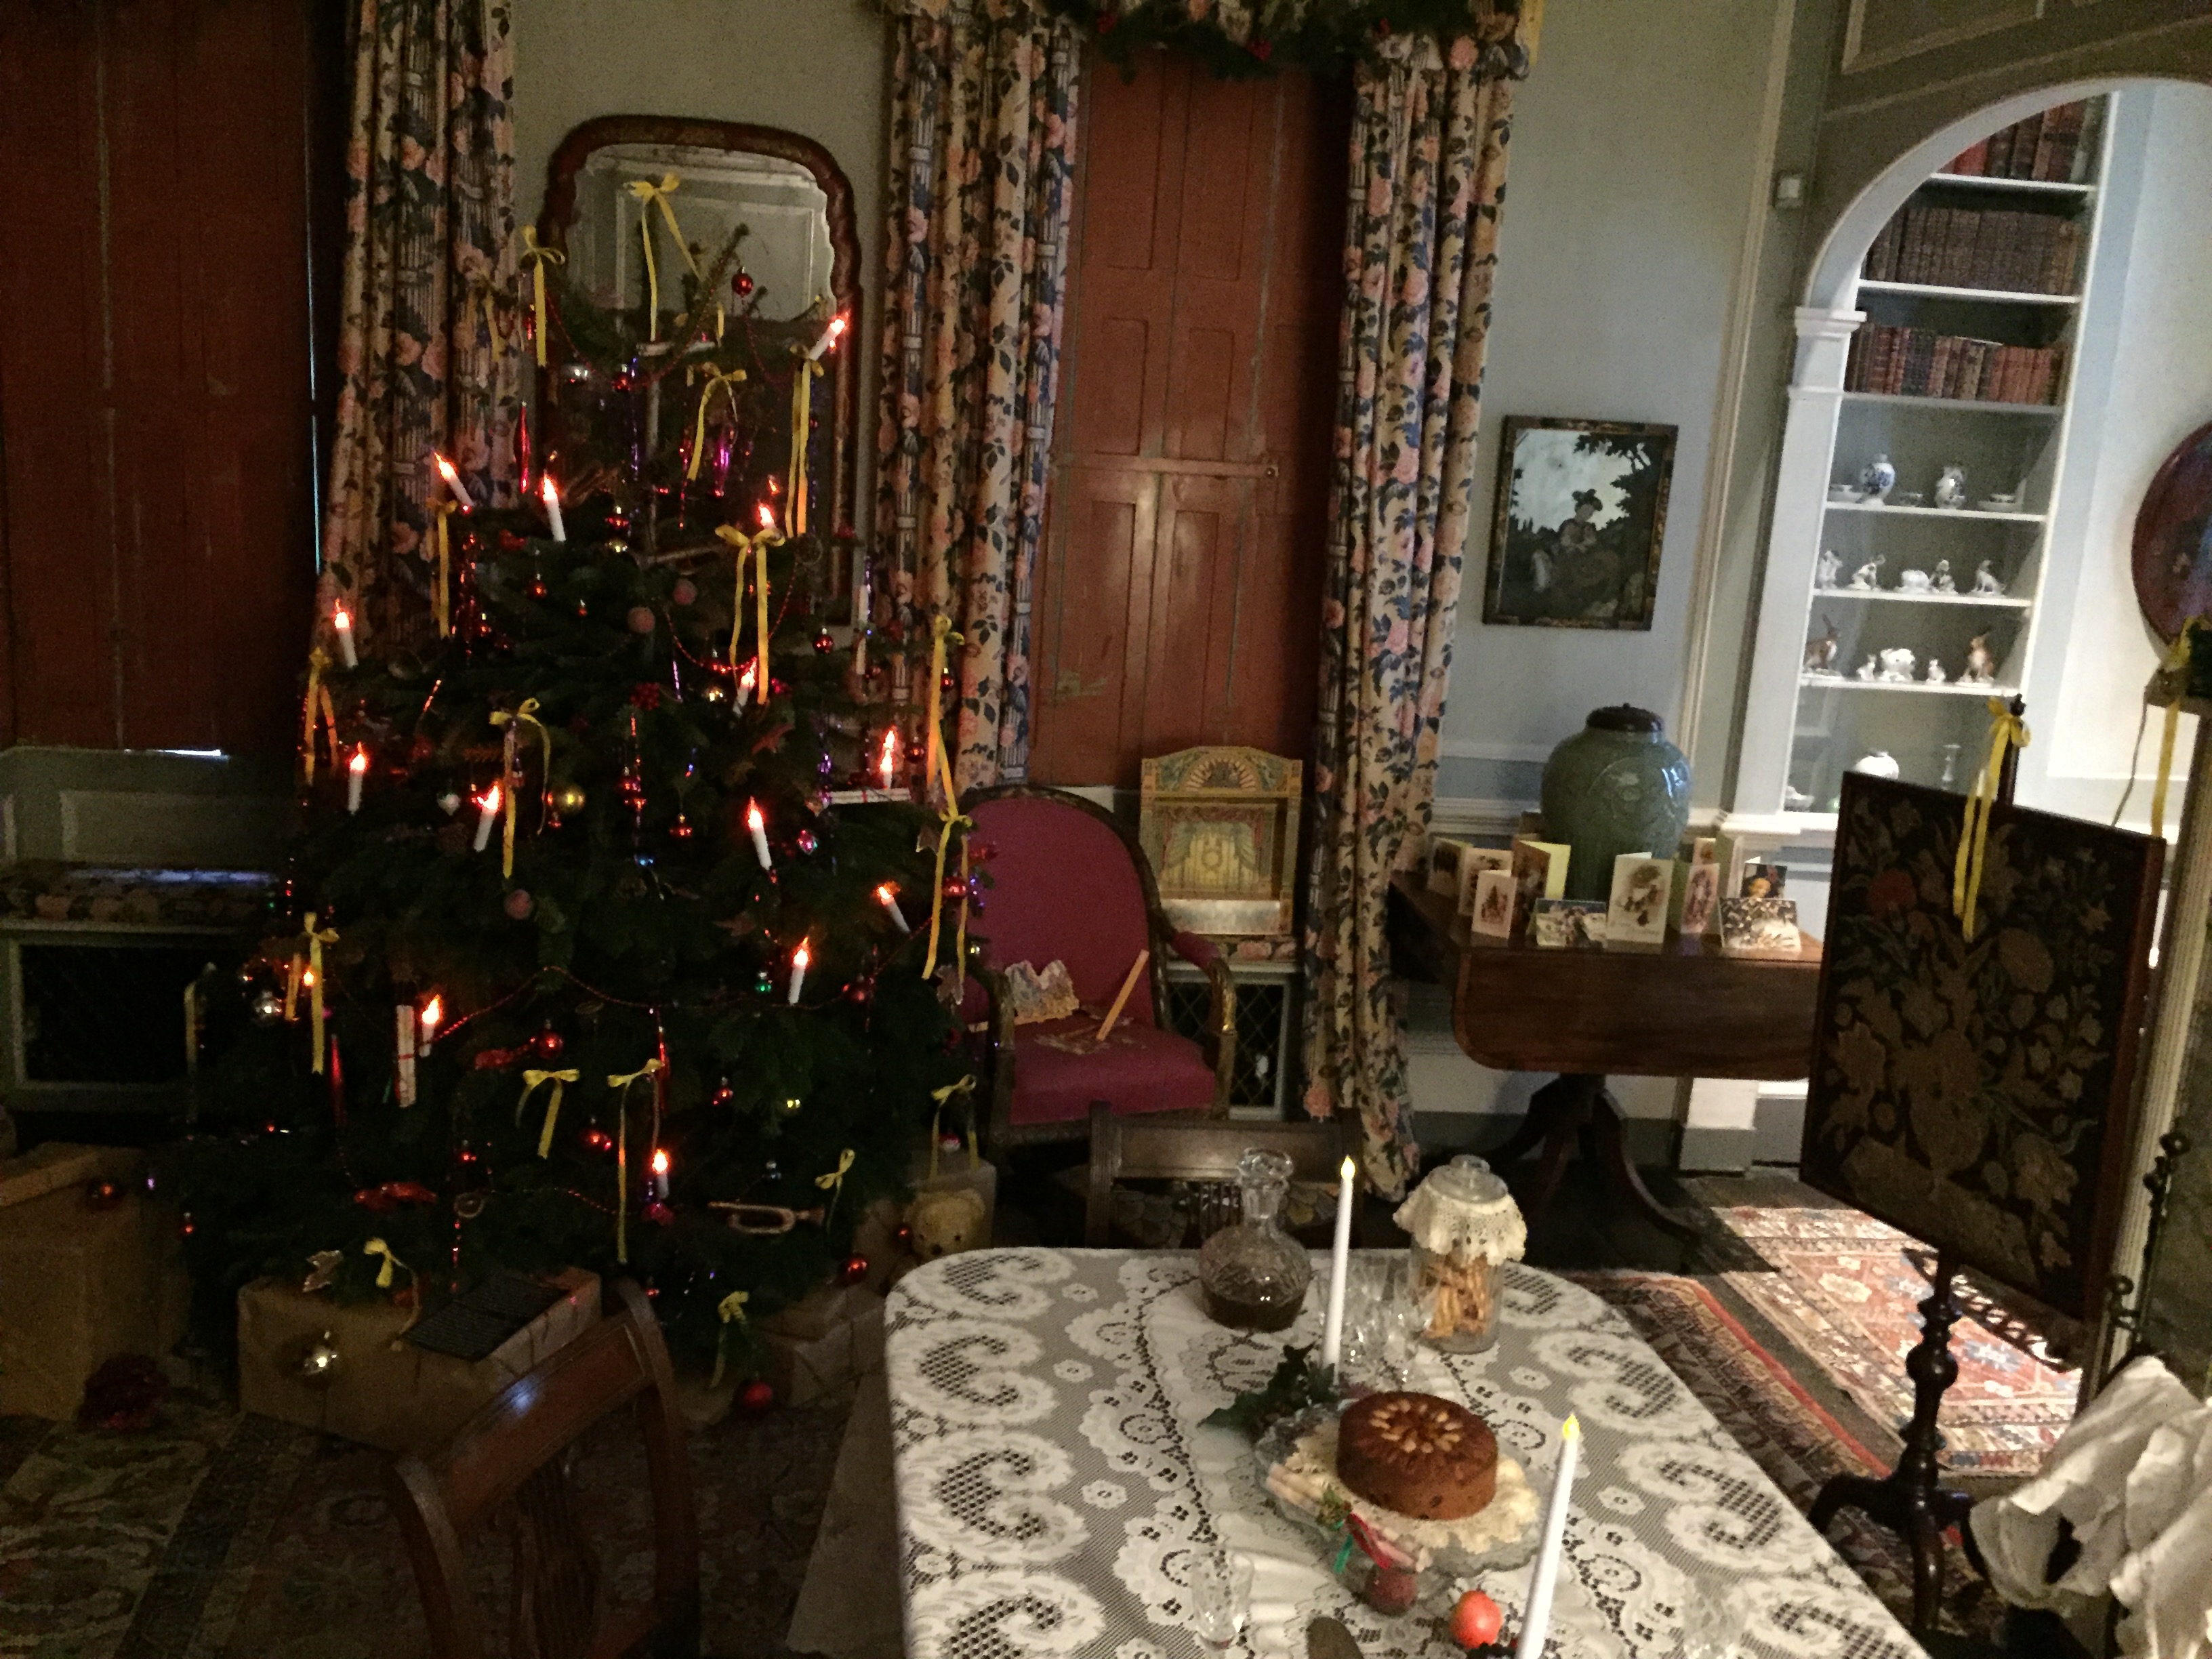 Victorian Christmas room at Fenton House, with a Christmas tree adorned with lights that look like candles, a small dining table with a couple of candles and some items of food on it, and Christmas cards on a desk.